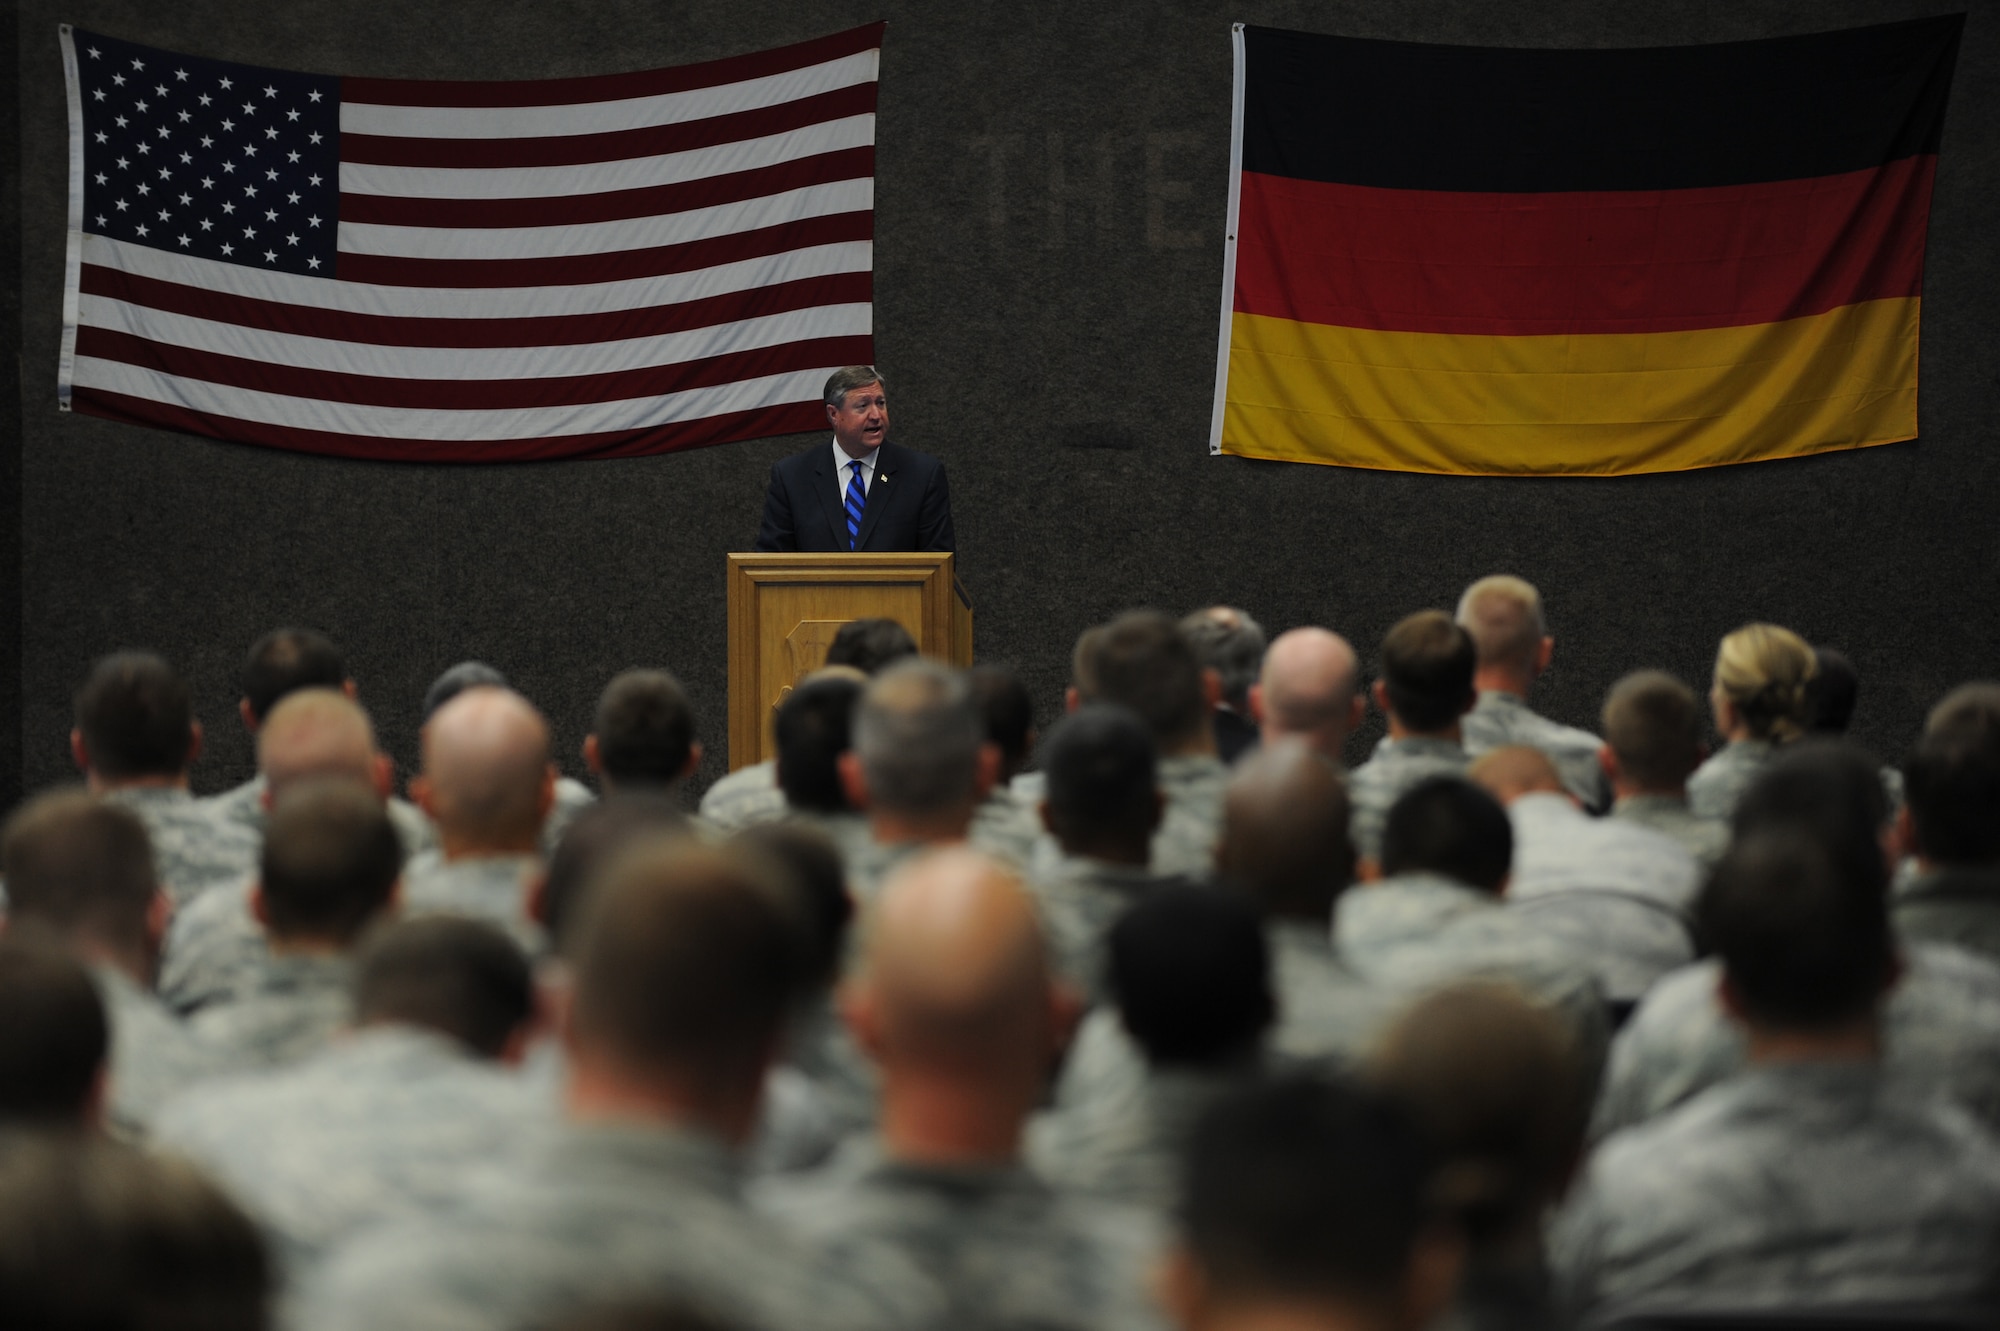 Secretary of the Air Force Michael Donley speaks to 52nd Fighter Wing Airmen during an Airmen’s Call at Spangdahlem Air Base, Germany, on July 13, 2012. During his visit, the secretary learned about the mission of the 52nd FW and the unique capabilities the base provides to the European theater of operations. (U.S. Air Force photo/Senior Airman Matthew B. Fredericks/Released)